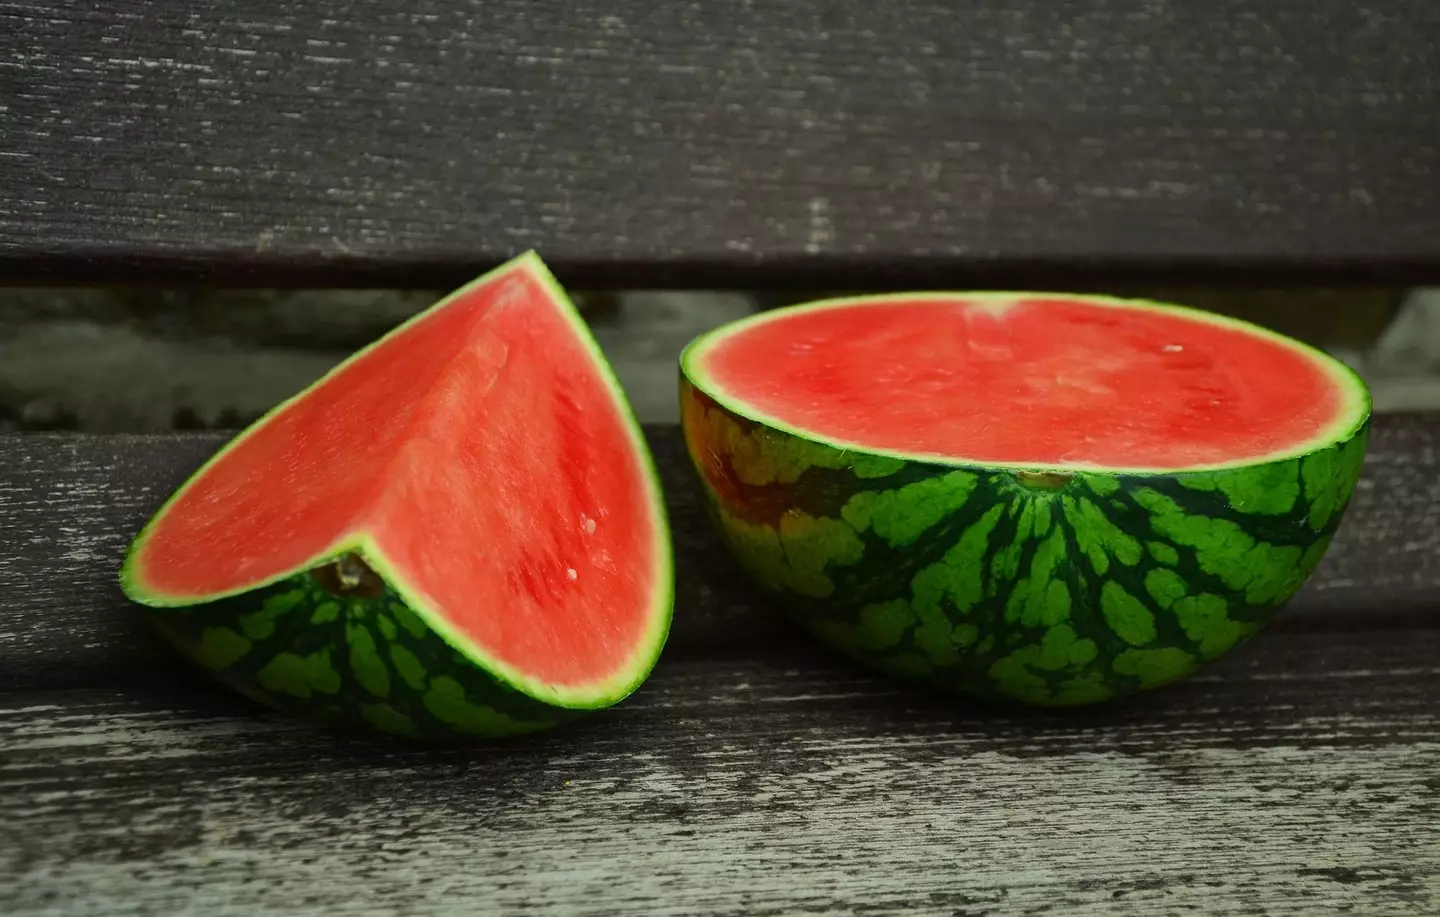 Pisarev's illness is thought to have been caused by watermelon.